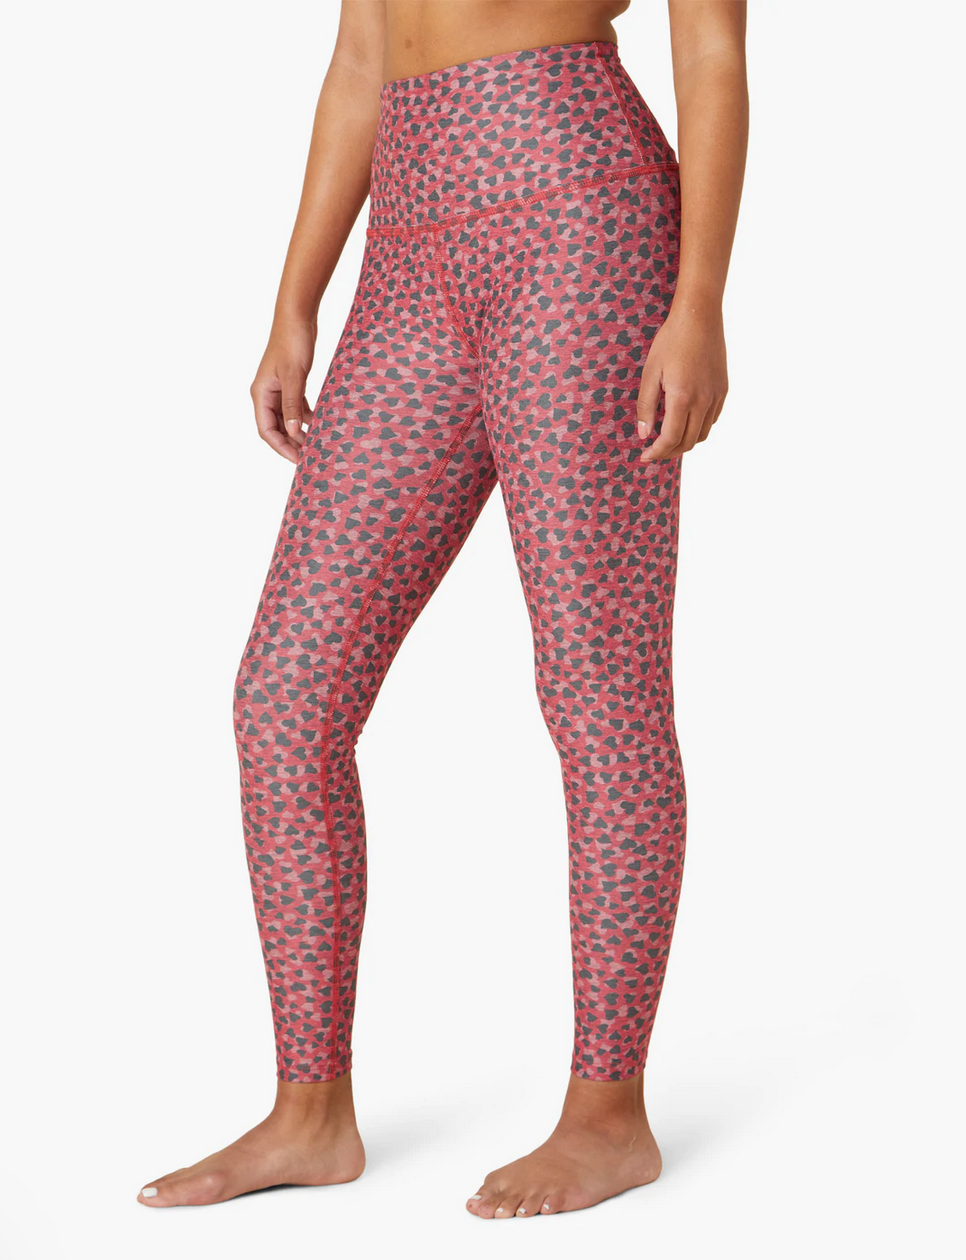 Beyond Yoga High-Waisted Midi Leggings  Anthropologie Singapore - Women's  Clothing, Accessories & Home